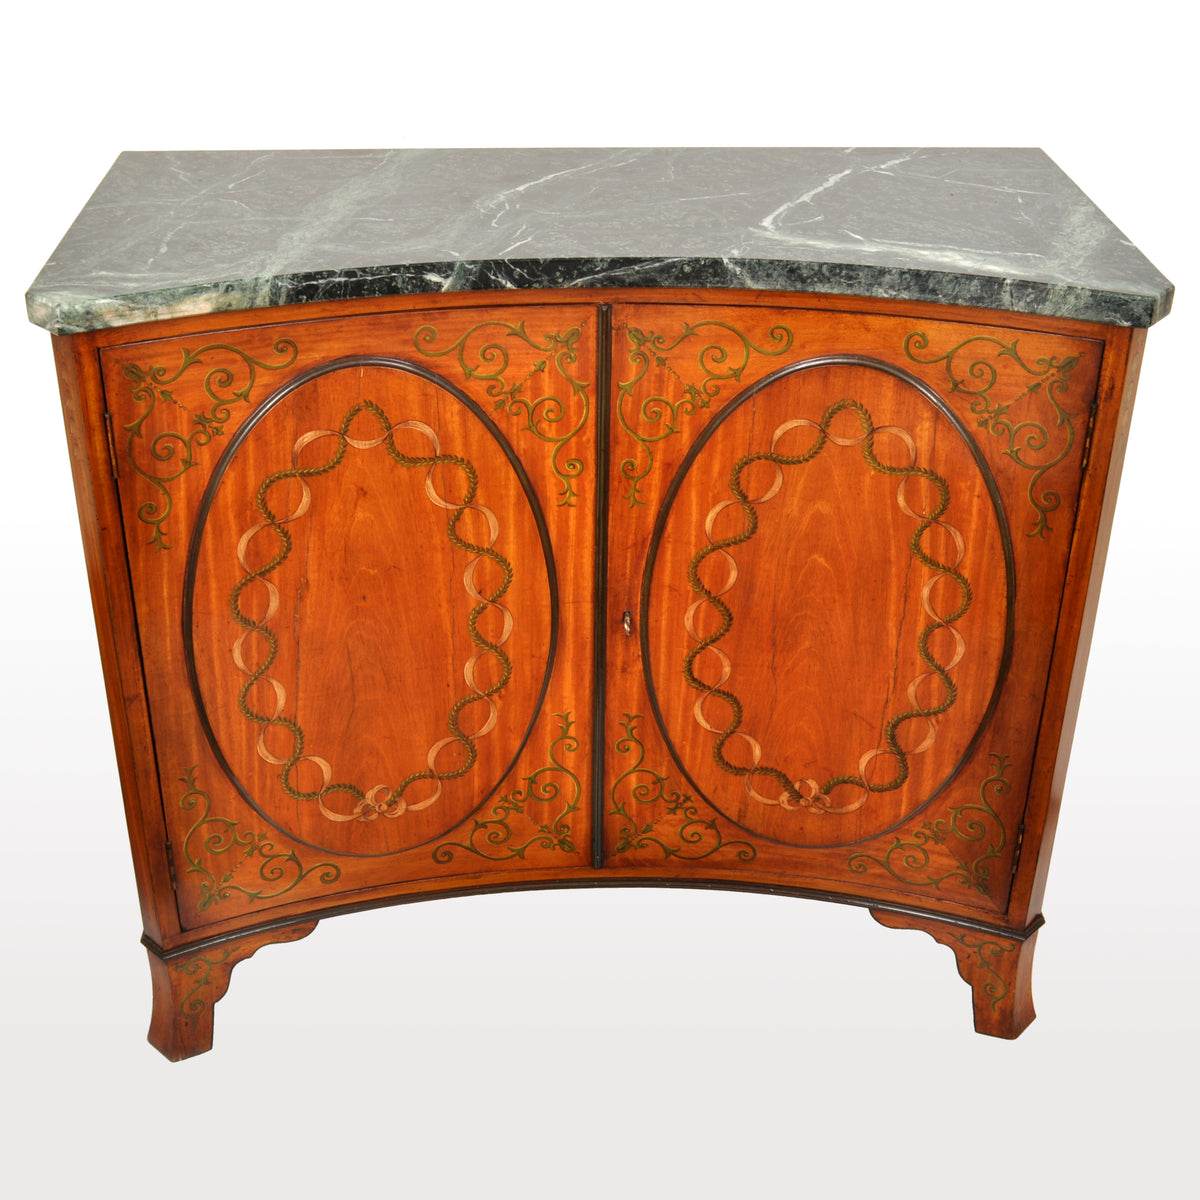 Pair of Antique Marble Top Painted Adam Revival Satinwood Commodes / Cabinets, circa 1880